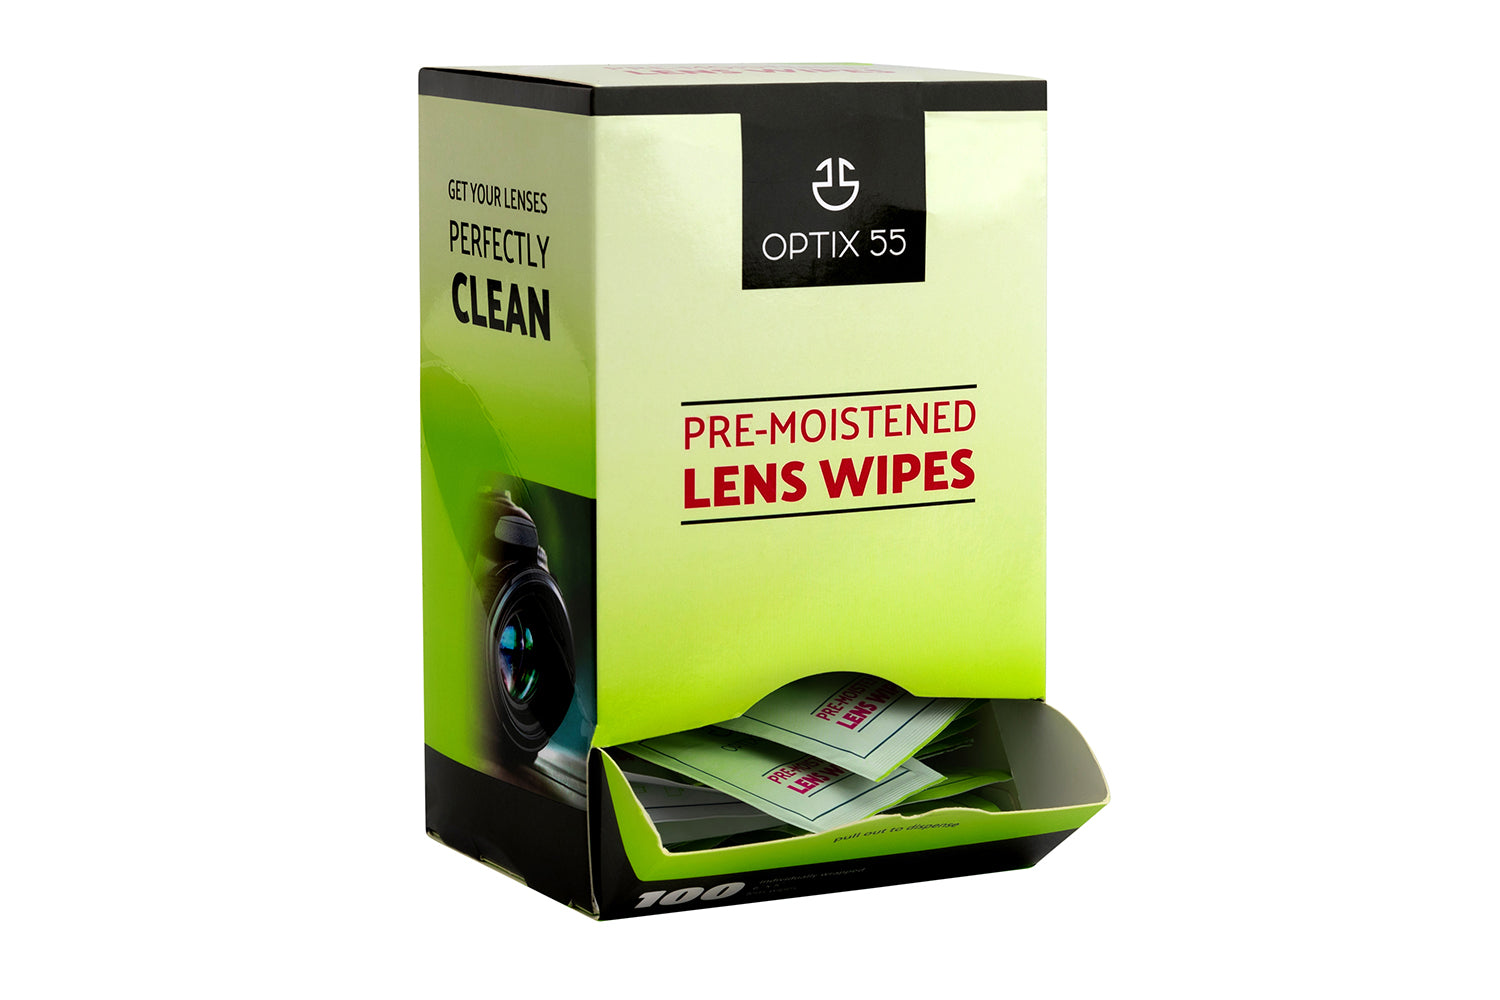 Eyeglass Cleaner Lens Wipes - 400 Pre-Moistened Individual Wrapped Eye  Glasses Cleaning Wipes | Glasses Cleaner Safely Cleans Glasses, Sunglasses